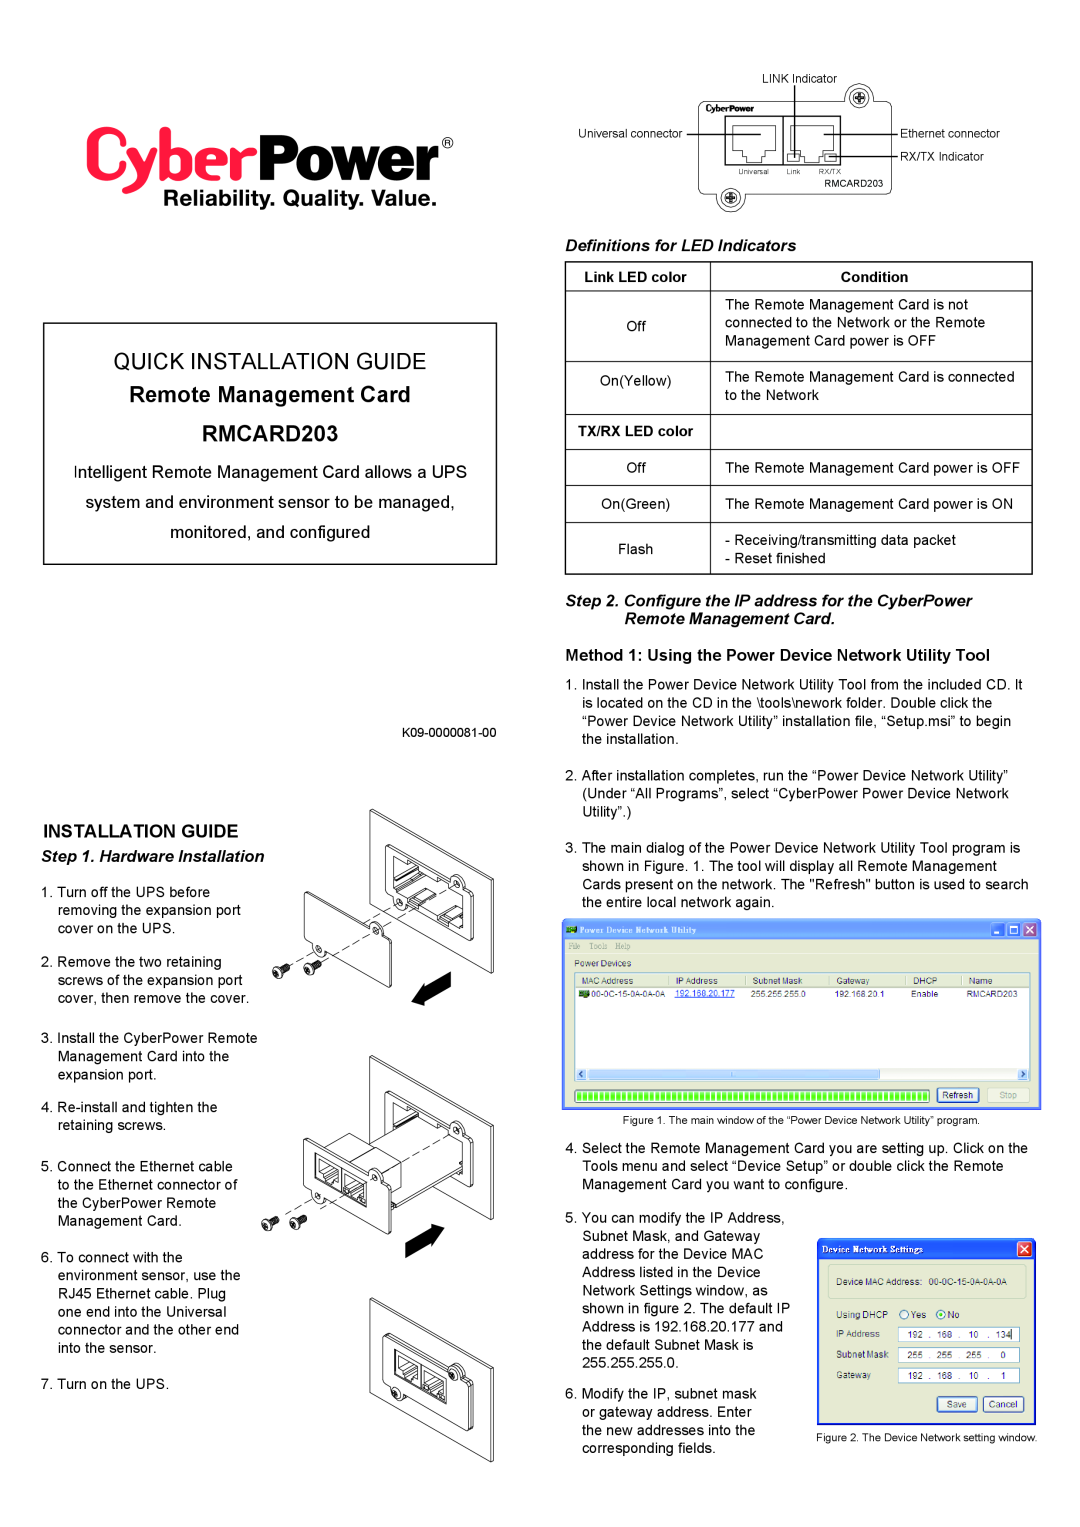 CyberPower Systems RMXARD203 manual Installation Guide, Method 1 Using the Power Device Network Utility Tool, Condition 